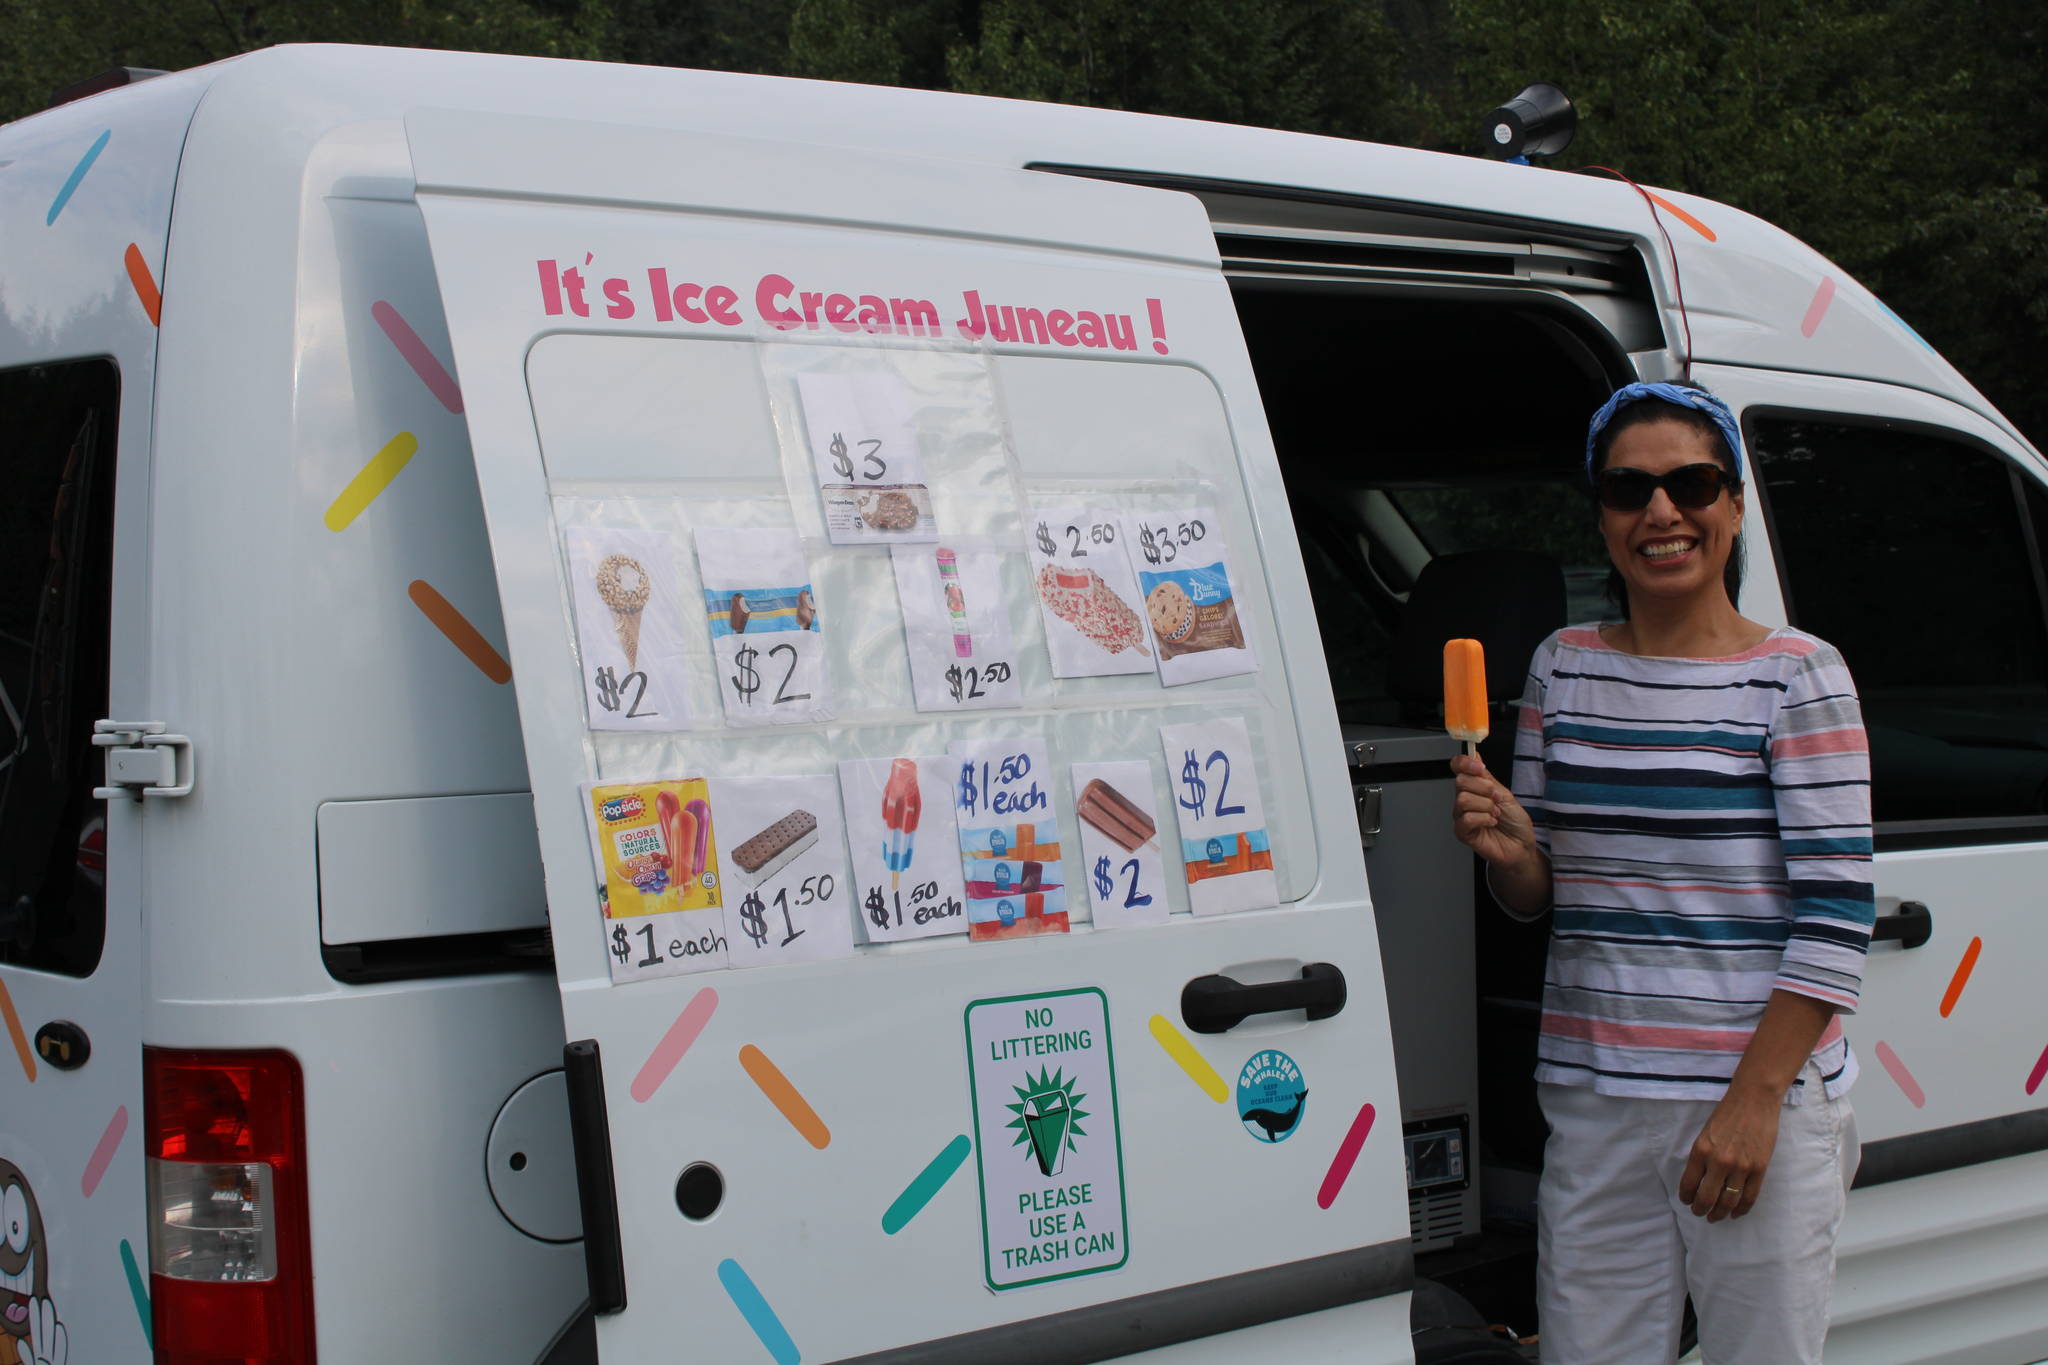 Cathy Mendoza shows off her wares on July 18. She said the best part of operating an ice cream truck is seeing children lined up and excited to see her approach. (Dana Zigmund/Juneau Empire)